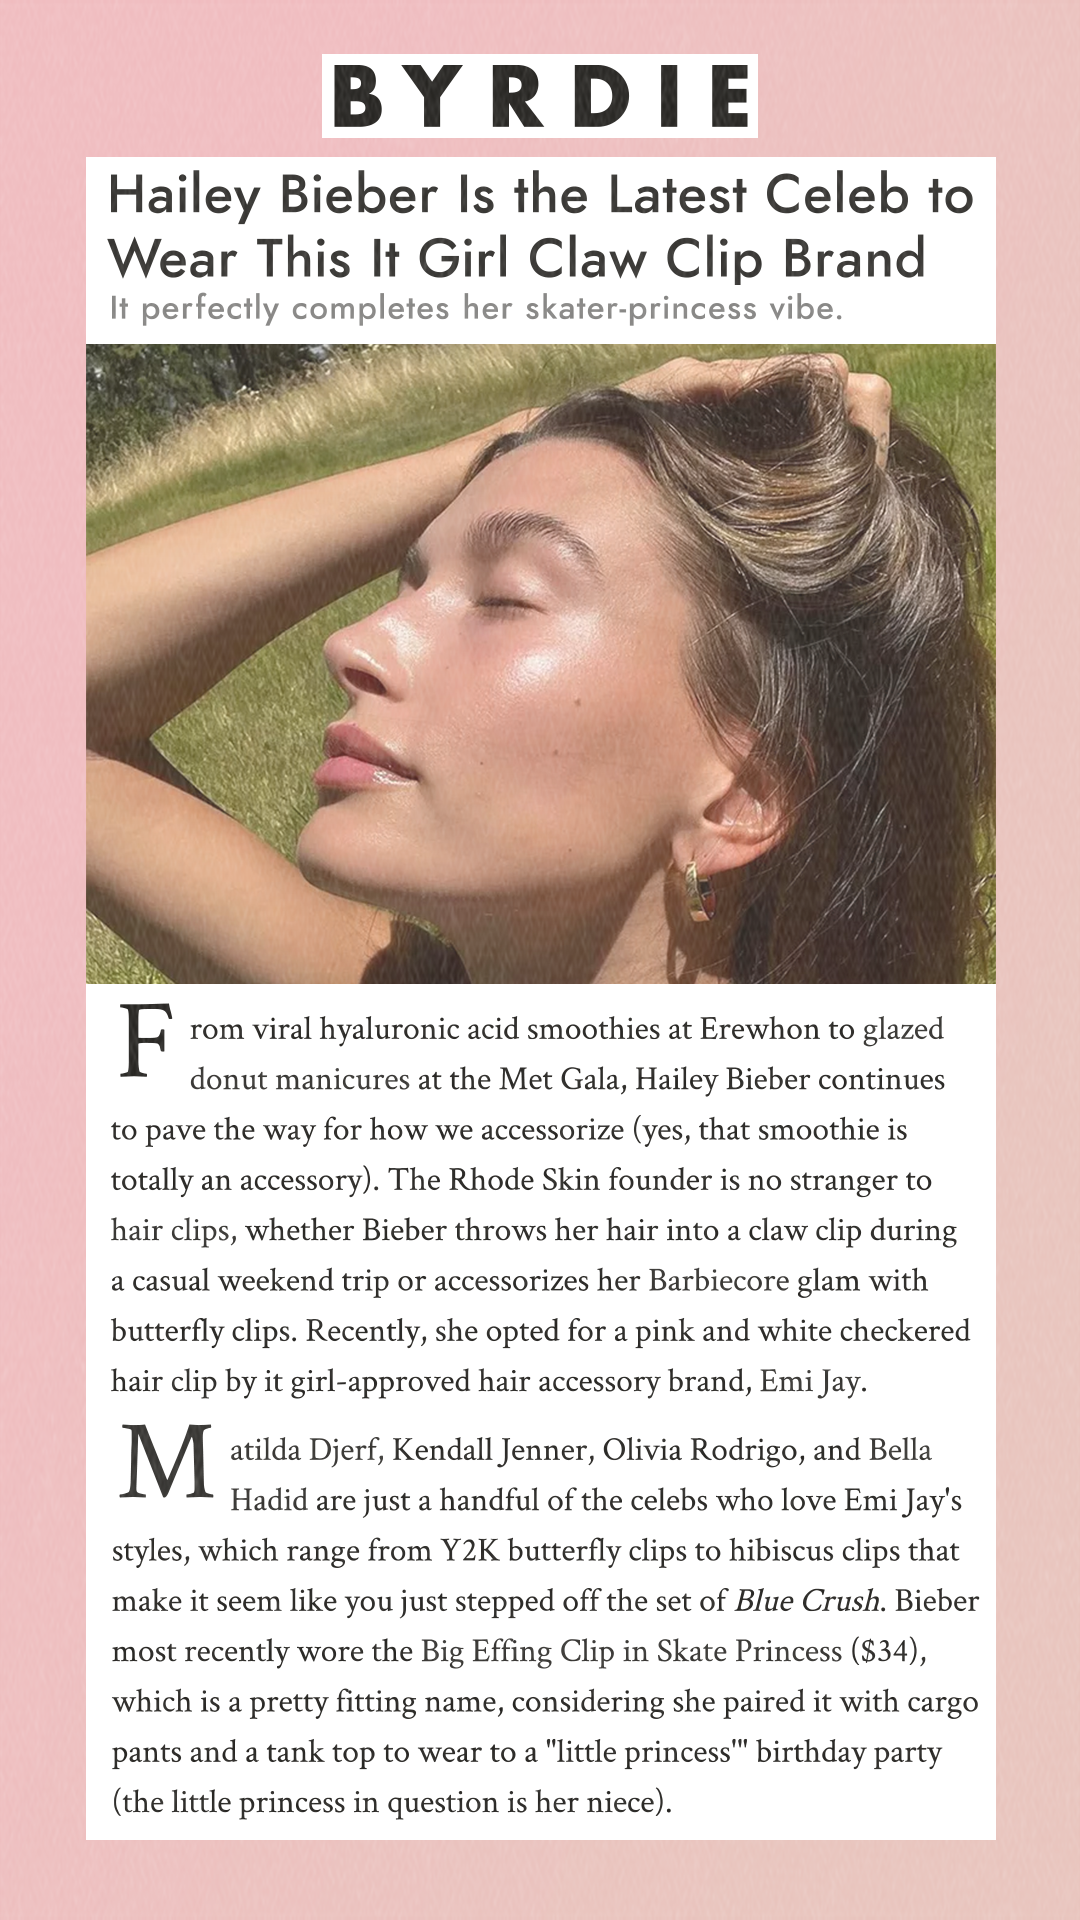 Hailey Bieber Is the Latest Celeb to Wear This It Girl Claw Clip Brand It perfectly completes her skater-princess vibe. From viral hyaluronic acid smoothies at Erewhon to glazed donut manicures at the Met Gala, Hailey Bieber continues to pave the way for how we accessorize (yes, that smoothie is totally an accessory). The Rhode Skin founder is no stranger to hair clips, whether Bieber throws her hair into a claw clip during a casual weekend trip or accessorizes her Barbiecore glam with butterfly clips. Recently, she opted for a pink and white checkered hair clip by it girl-approved hair accessory brand, Emi Jay. Matilda Djerf, Kendall Jenner, Olivia Rodrigo, and Bella Hadid are just a handful of the celebs who love Emi Jay's styles, which range from Y2K butterfly clips to hibiscus clips that make it seem like you just stepped off the set of Blue Crush. Bieber most recently wore the Big Effing Clip in Skate Princess ($34), which is a pretty fitting name, considering she paired it with cargo pants and a tank top to wear to a 'little princess' birthday party (the little princess in question is her niece).